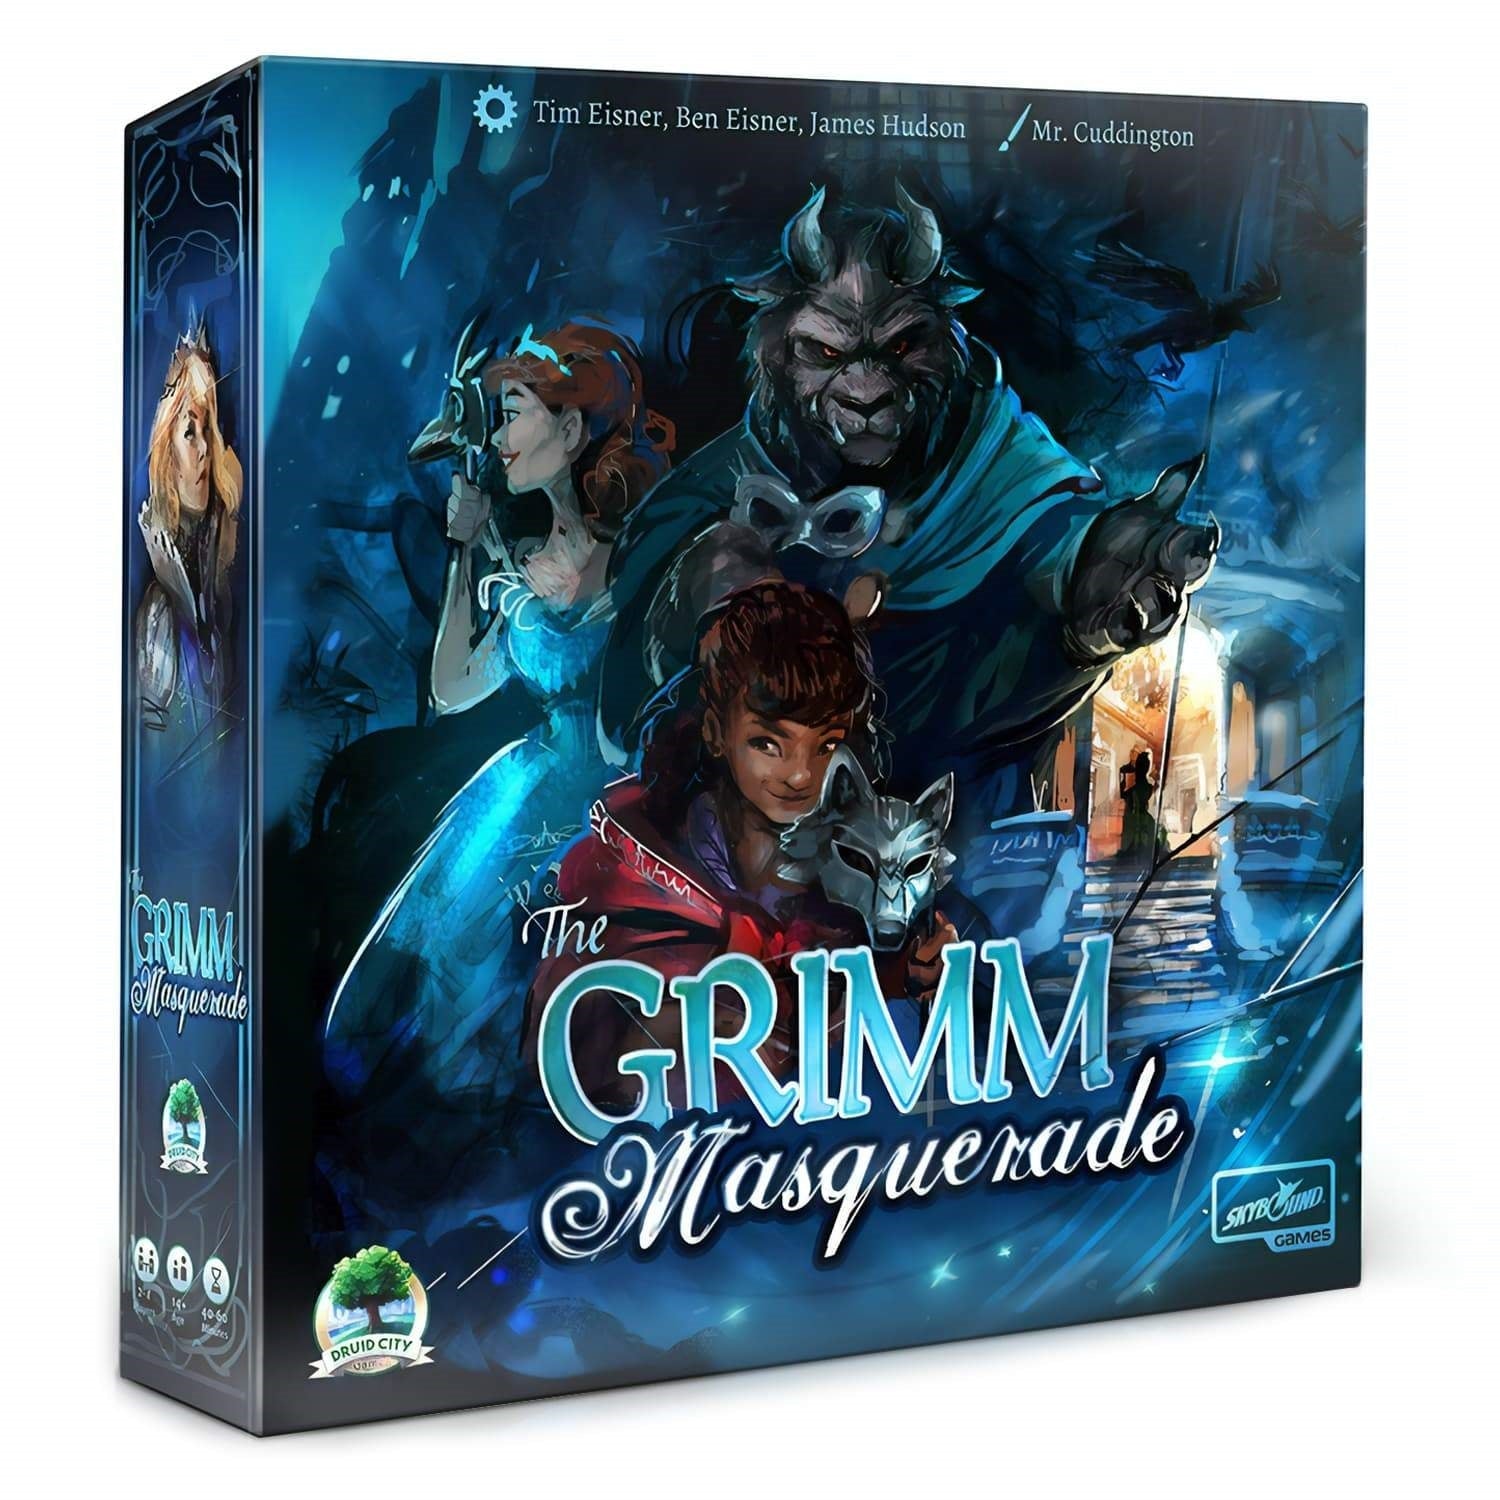 (BSG Certified USED) The Grimm Forest: The Grimm Masquerade